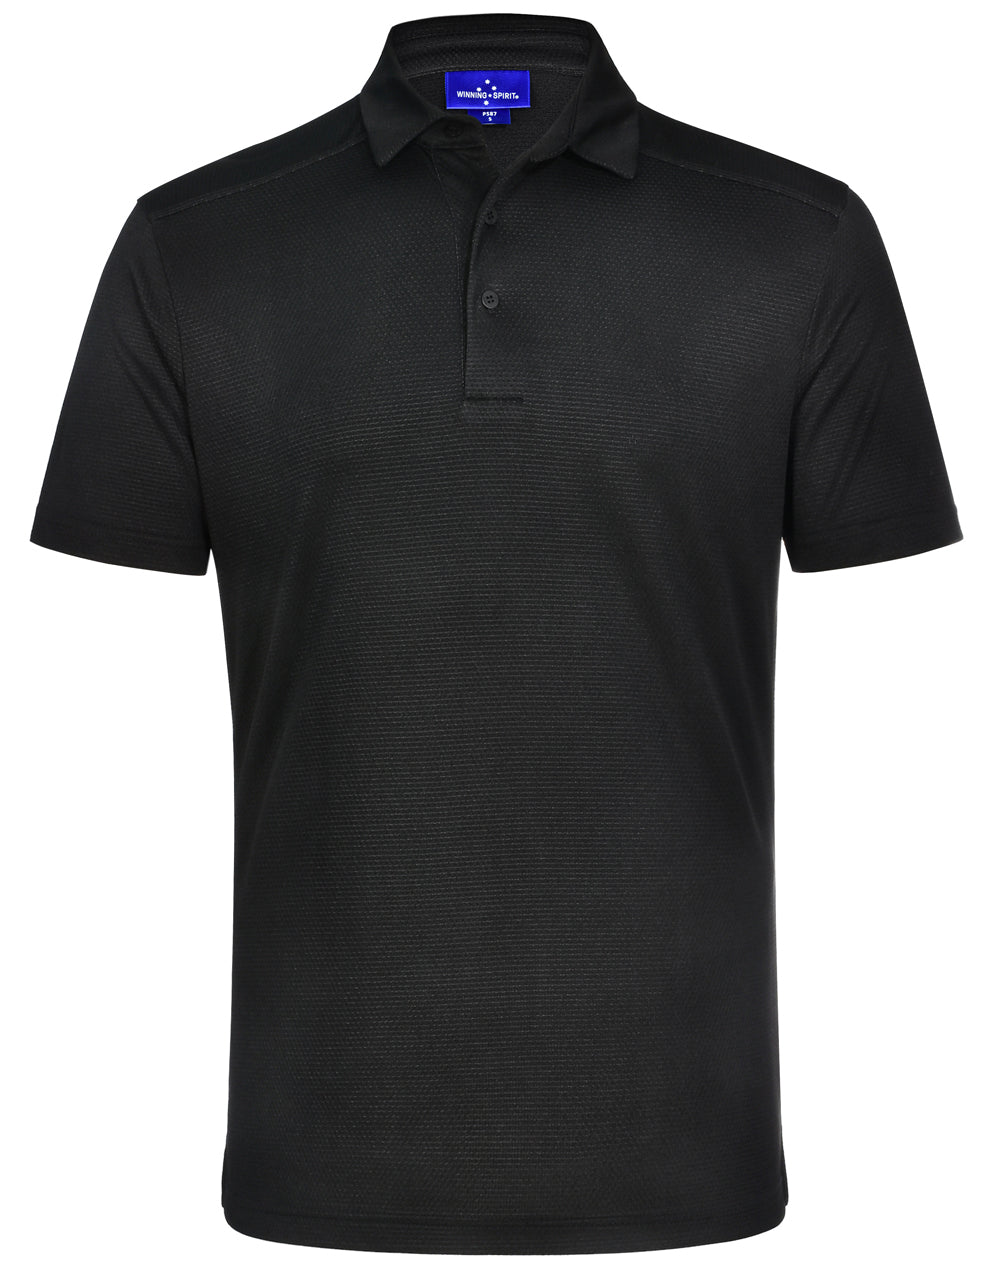 [PS87] Men's Bamboo Charcoal Corporate S/S Polo